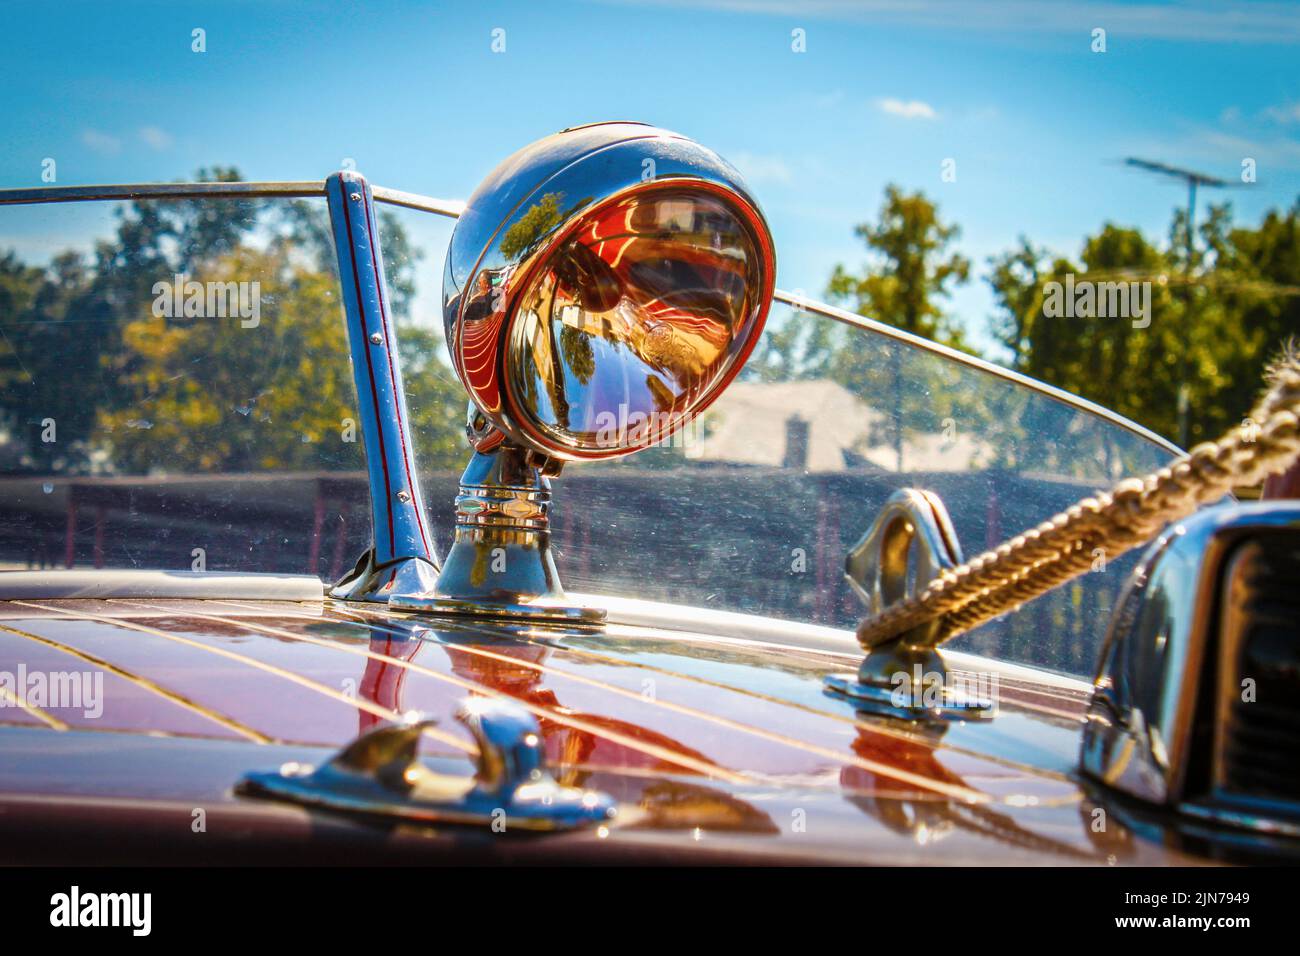 Spotlight on teak wooden race boat with reflections of wood and surroundings on glass and metal Stock Photo